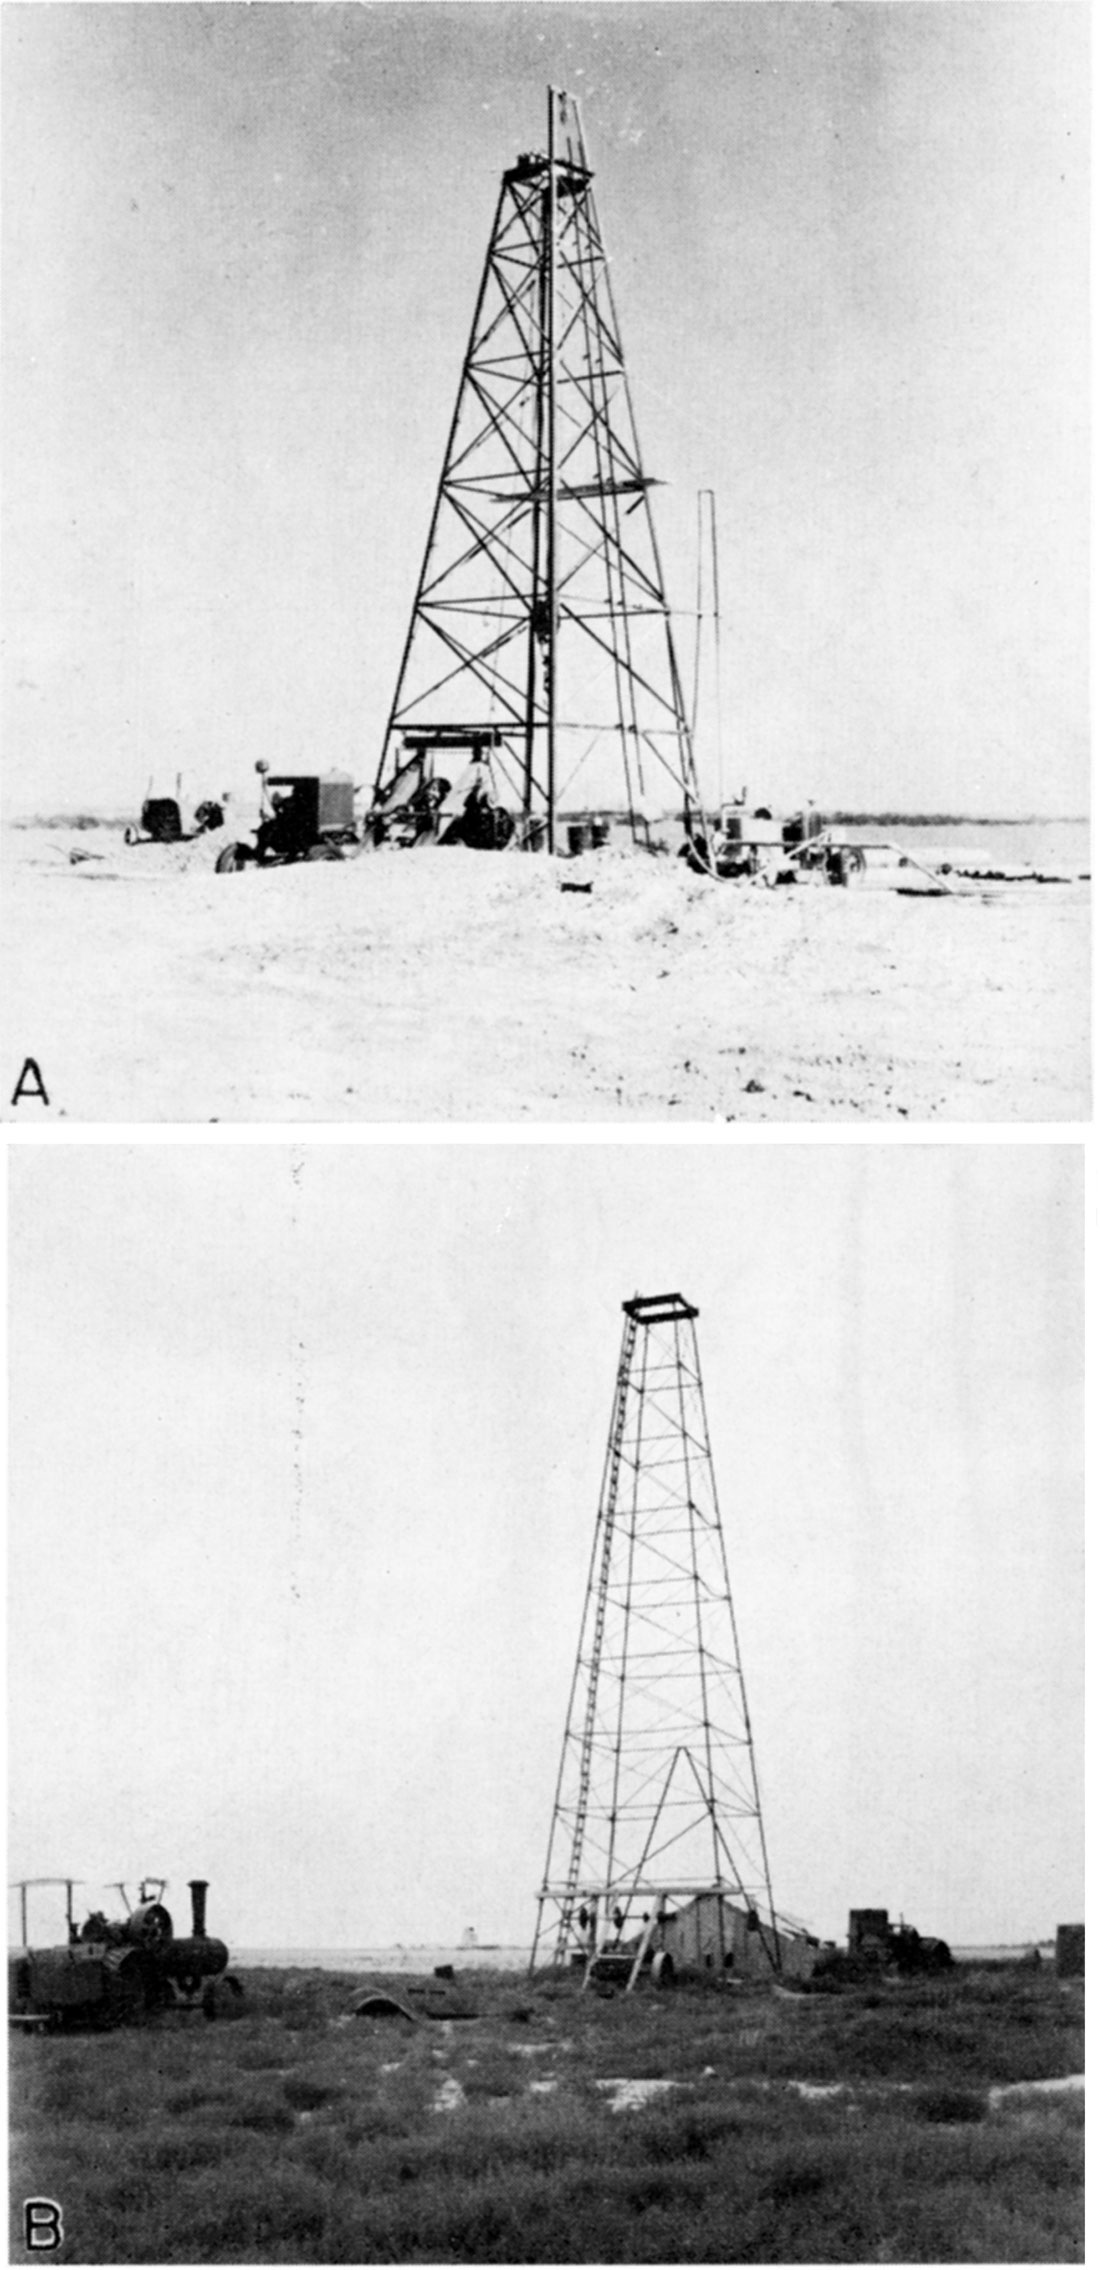 Two black and white photos; top is rotary well-drilling rigs; bottom is well 41 being drilled by a portable rig.